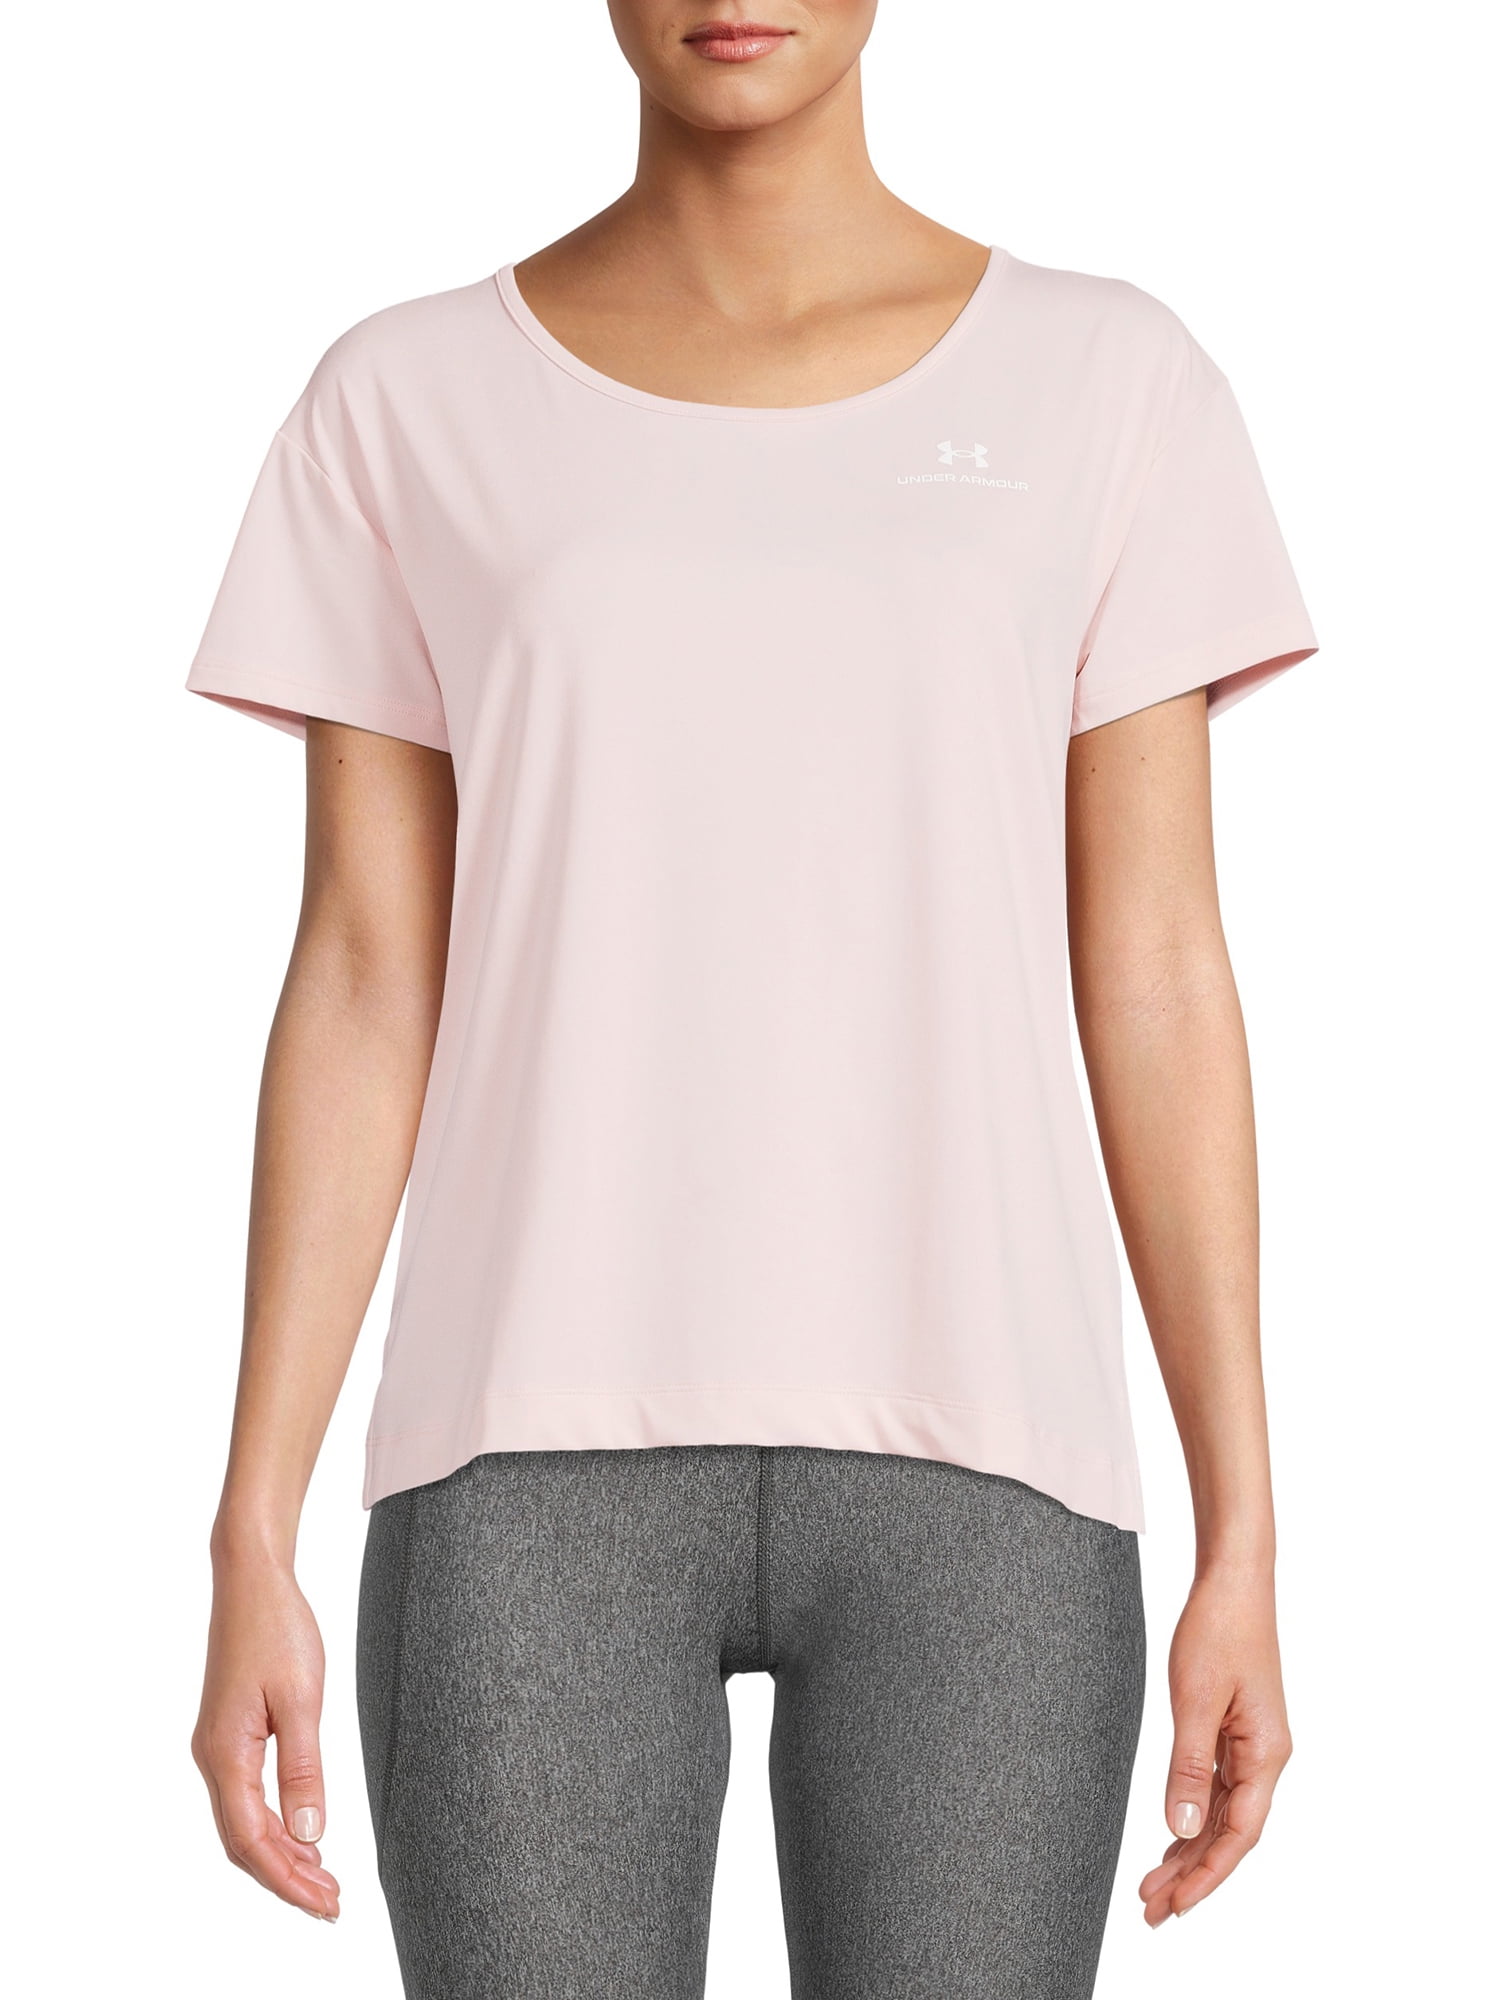 Under Armour Women's Energy Core T-Shirt with Short Sleeves 